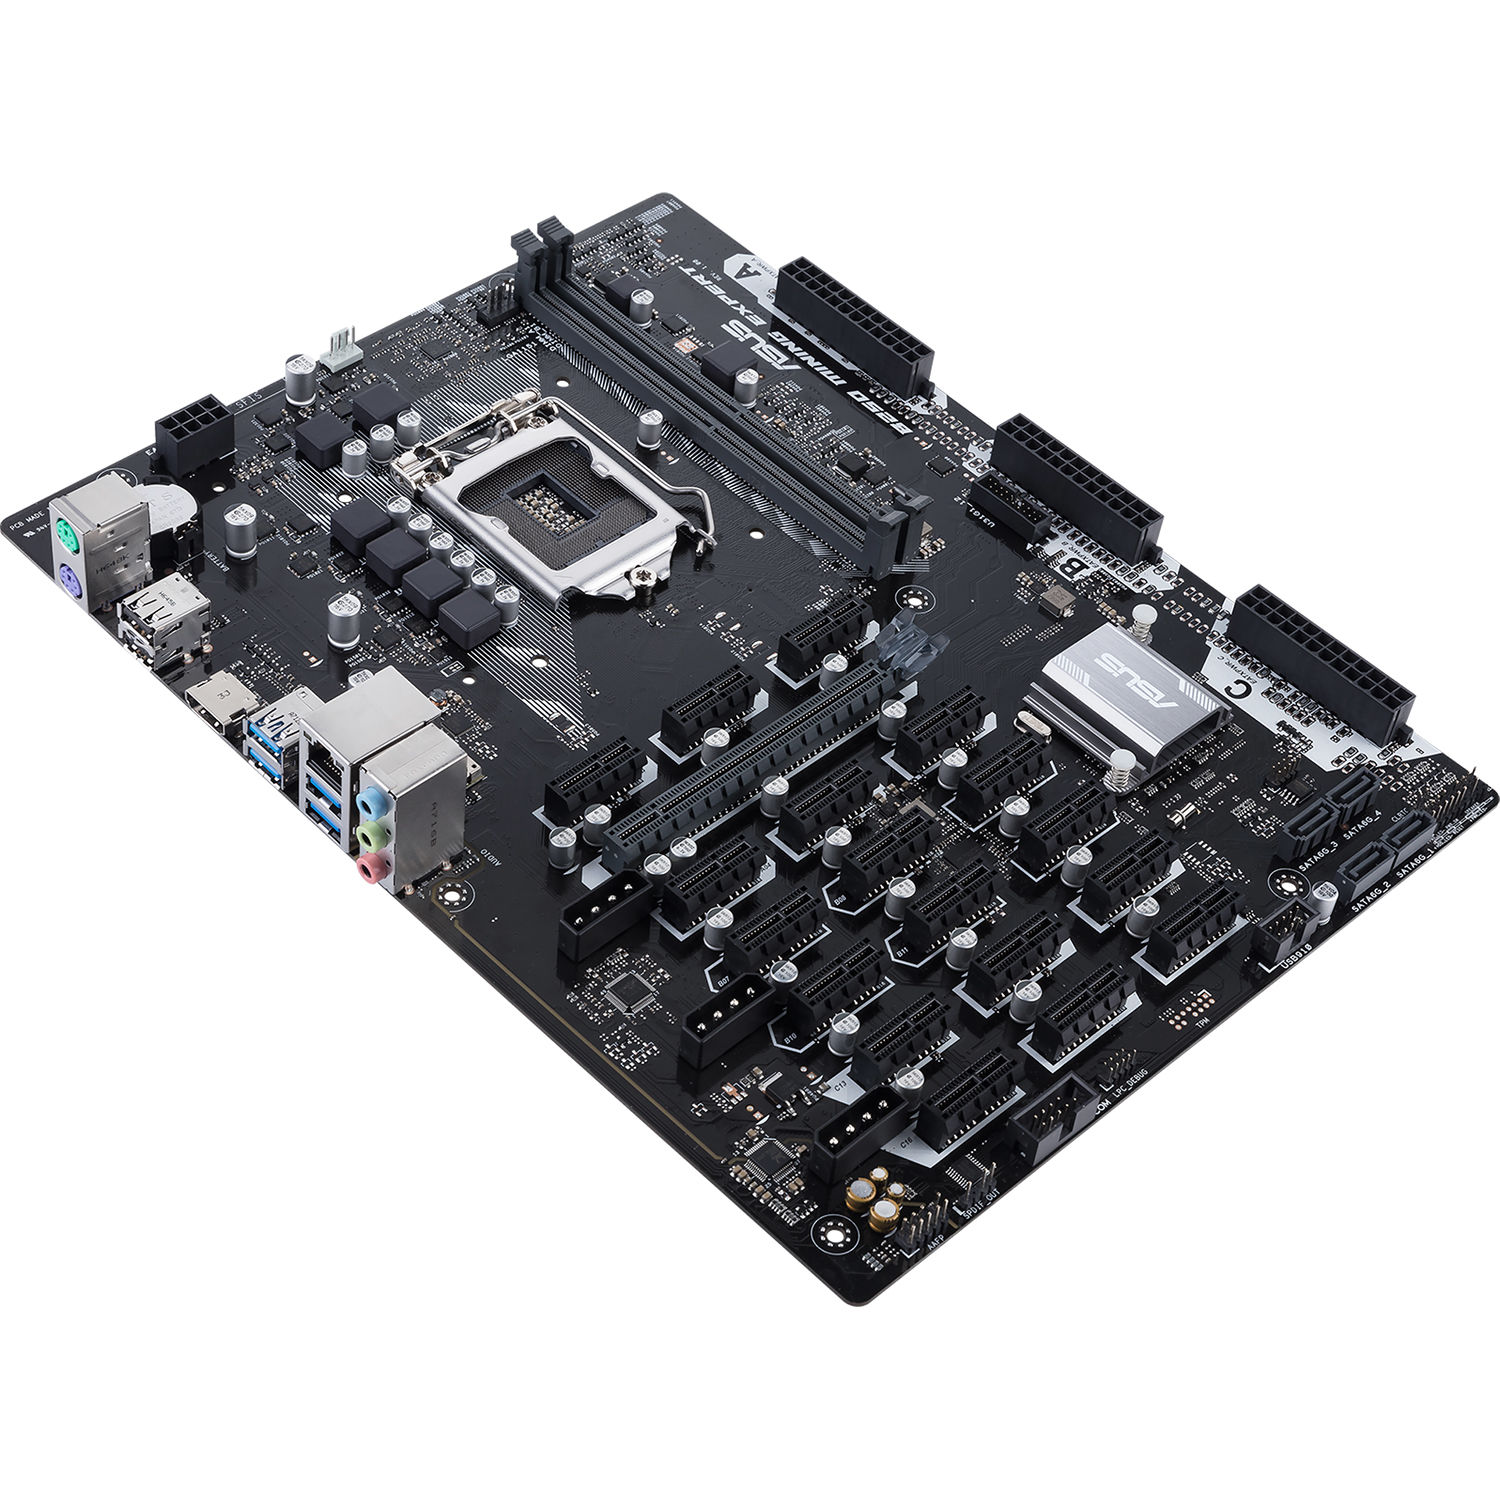 ASUS B250 Mining Expert ATX Motherboard 19 GPU slots for cryptocurrency Hot Sale 